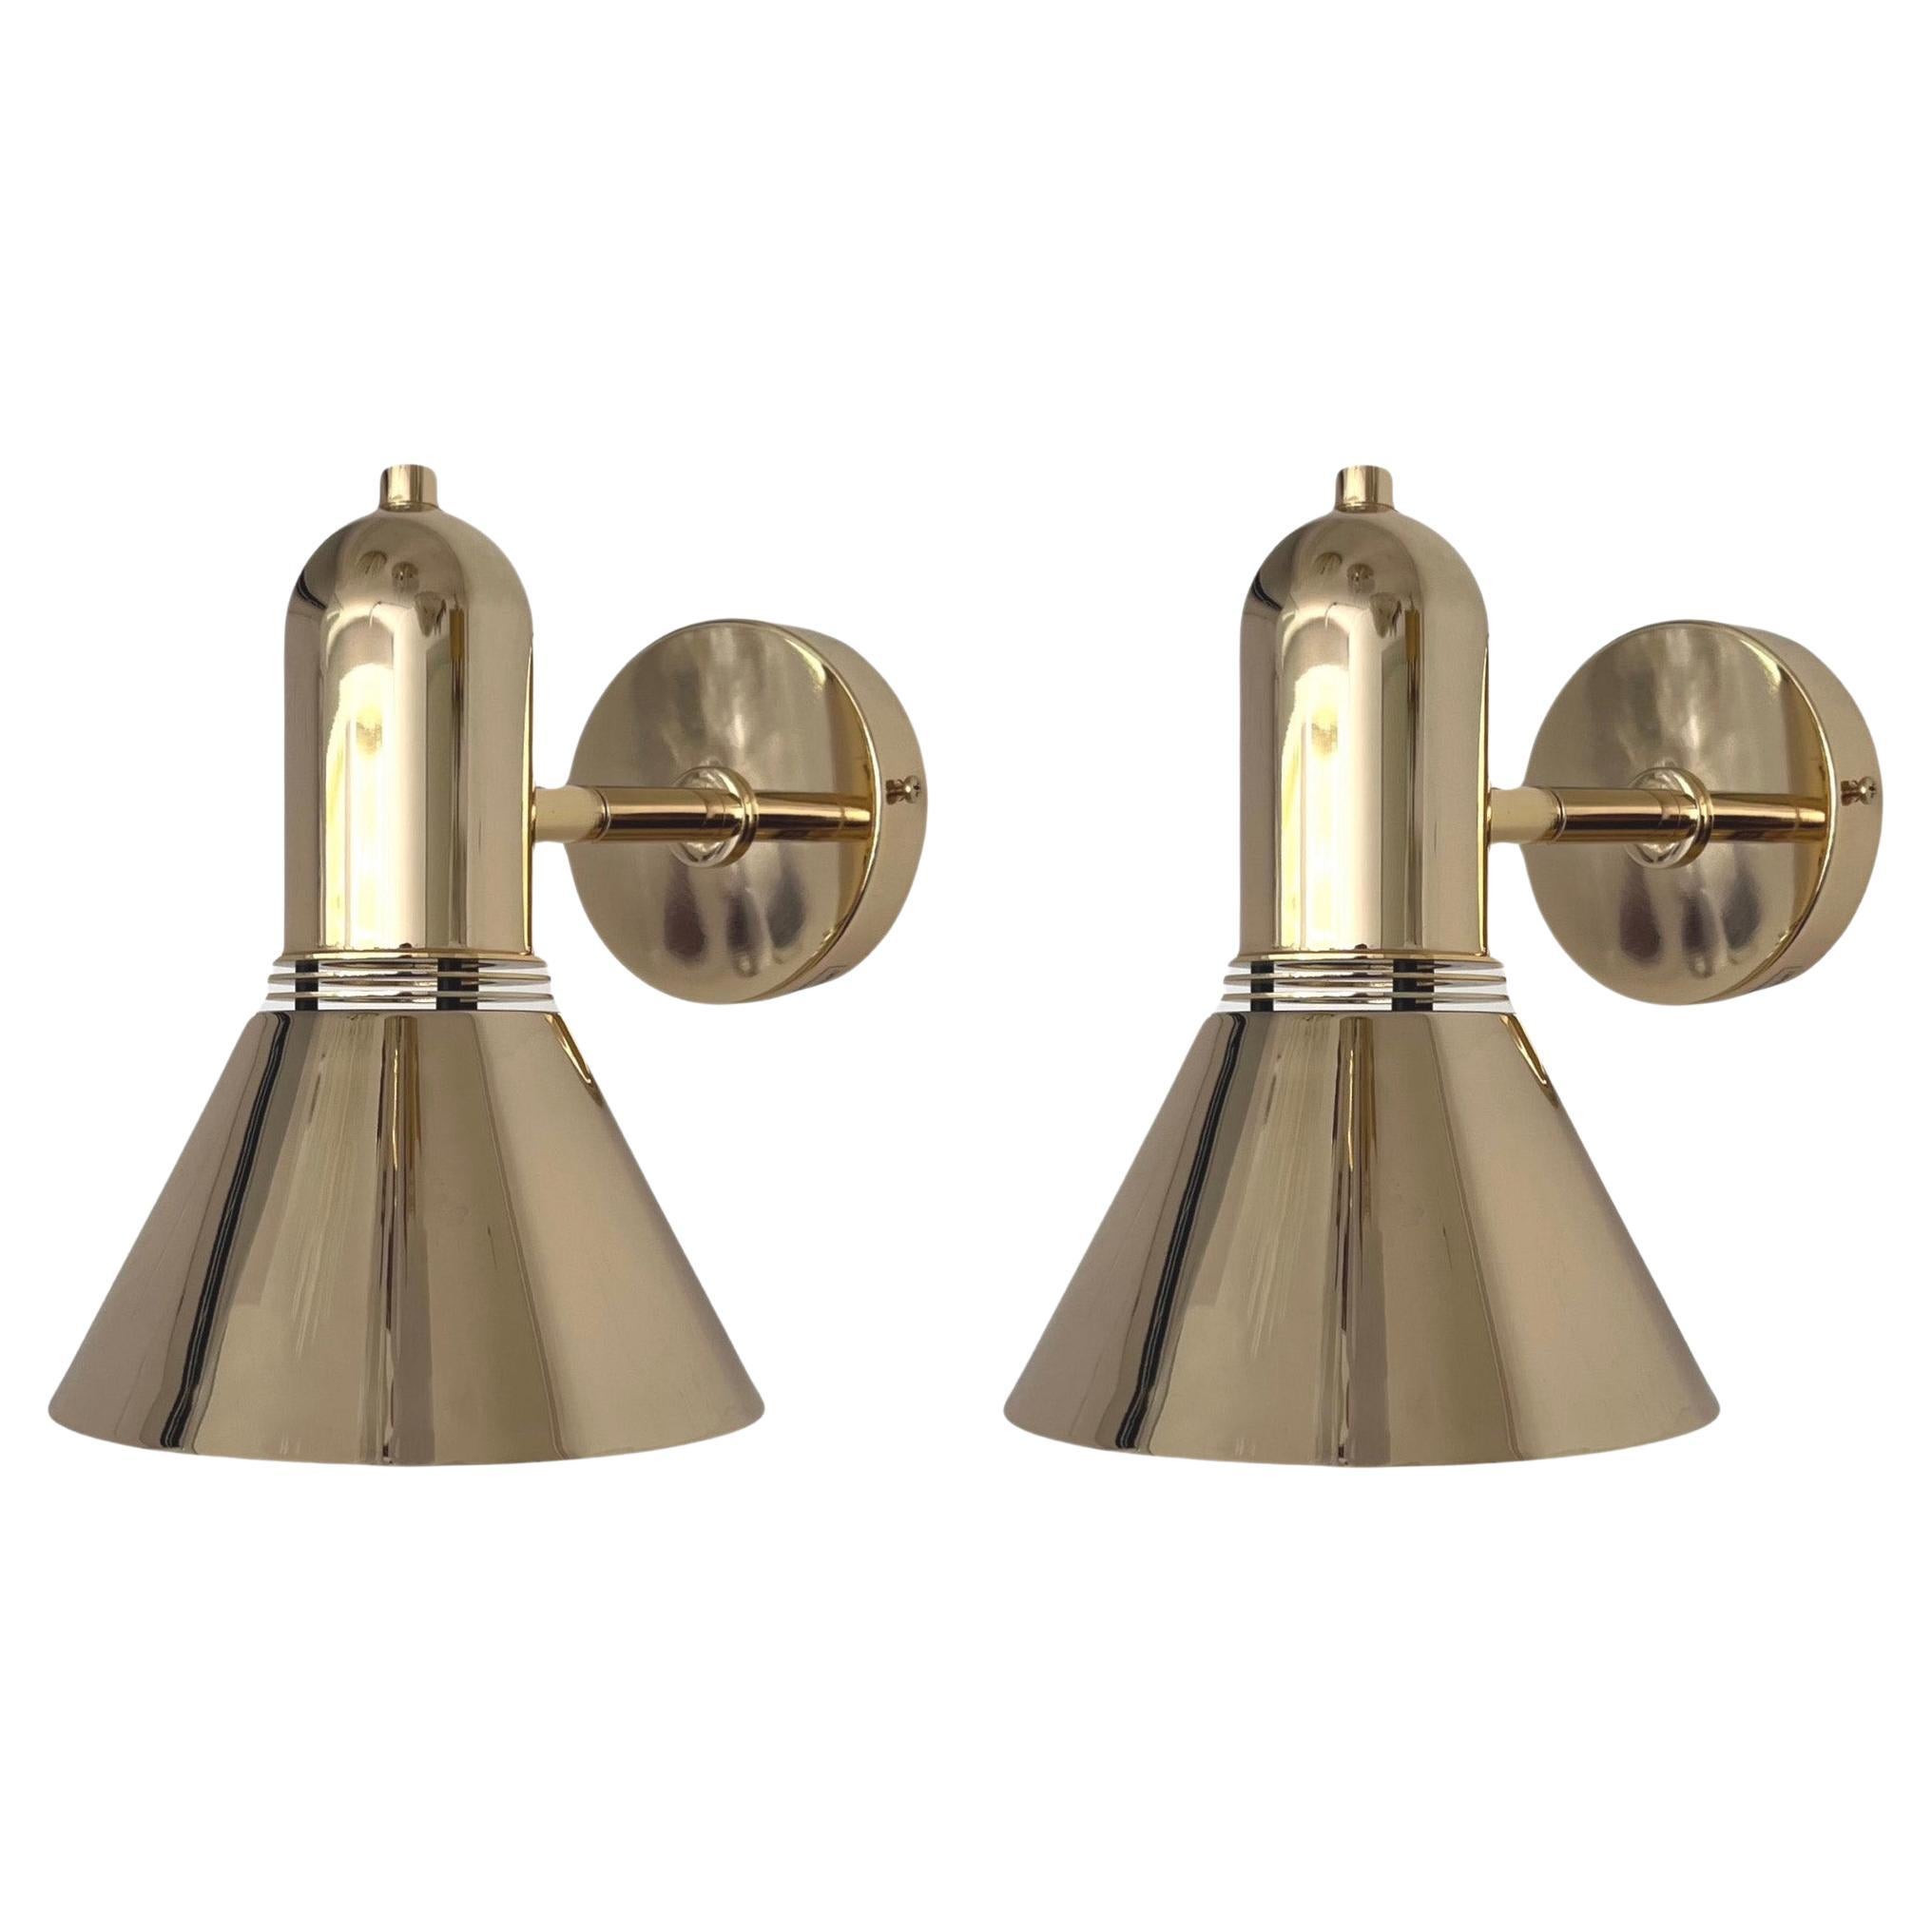 Mid-Century Articulated Pair of Gold Wall Sconces by Estiluz, Barcelona, 1970s For Sale